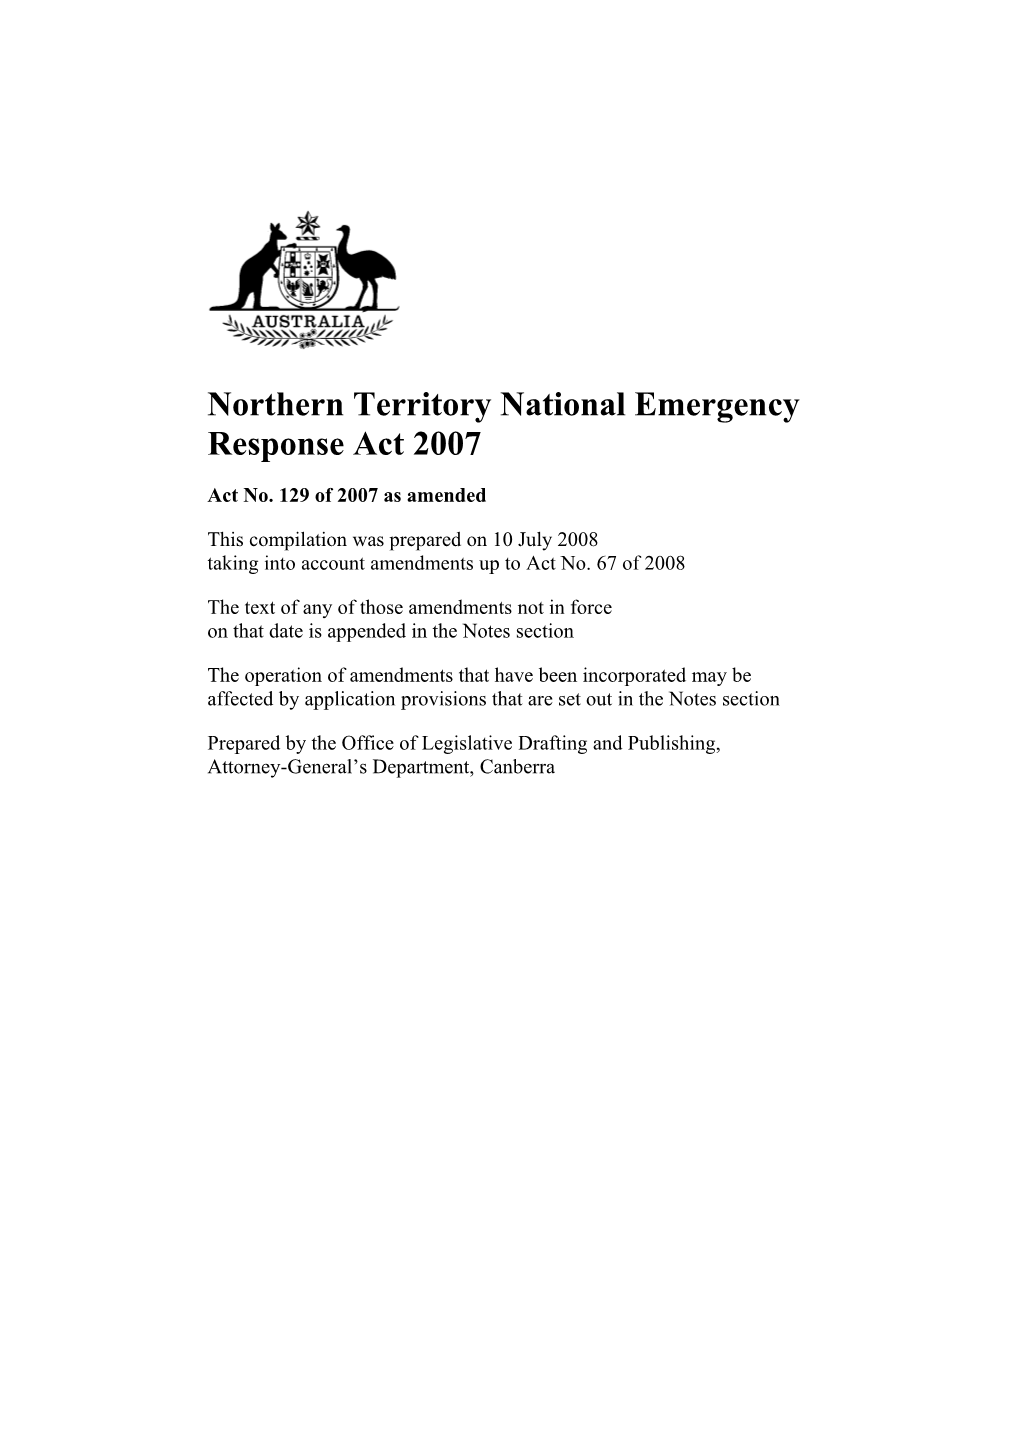 Northern Territory National Emergency Response Act 2007